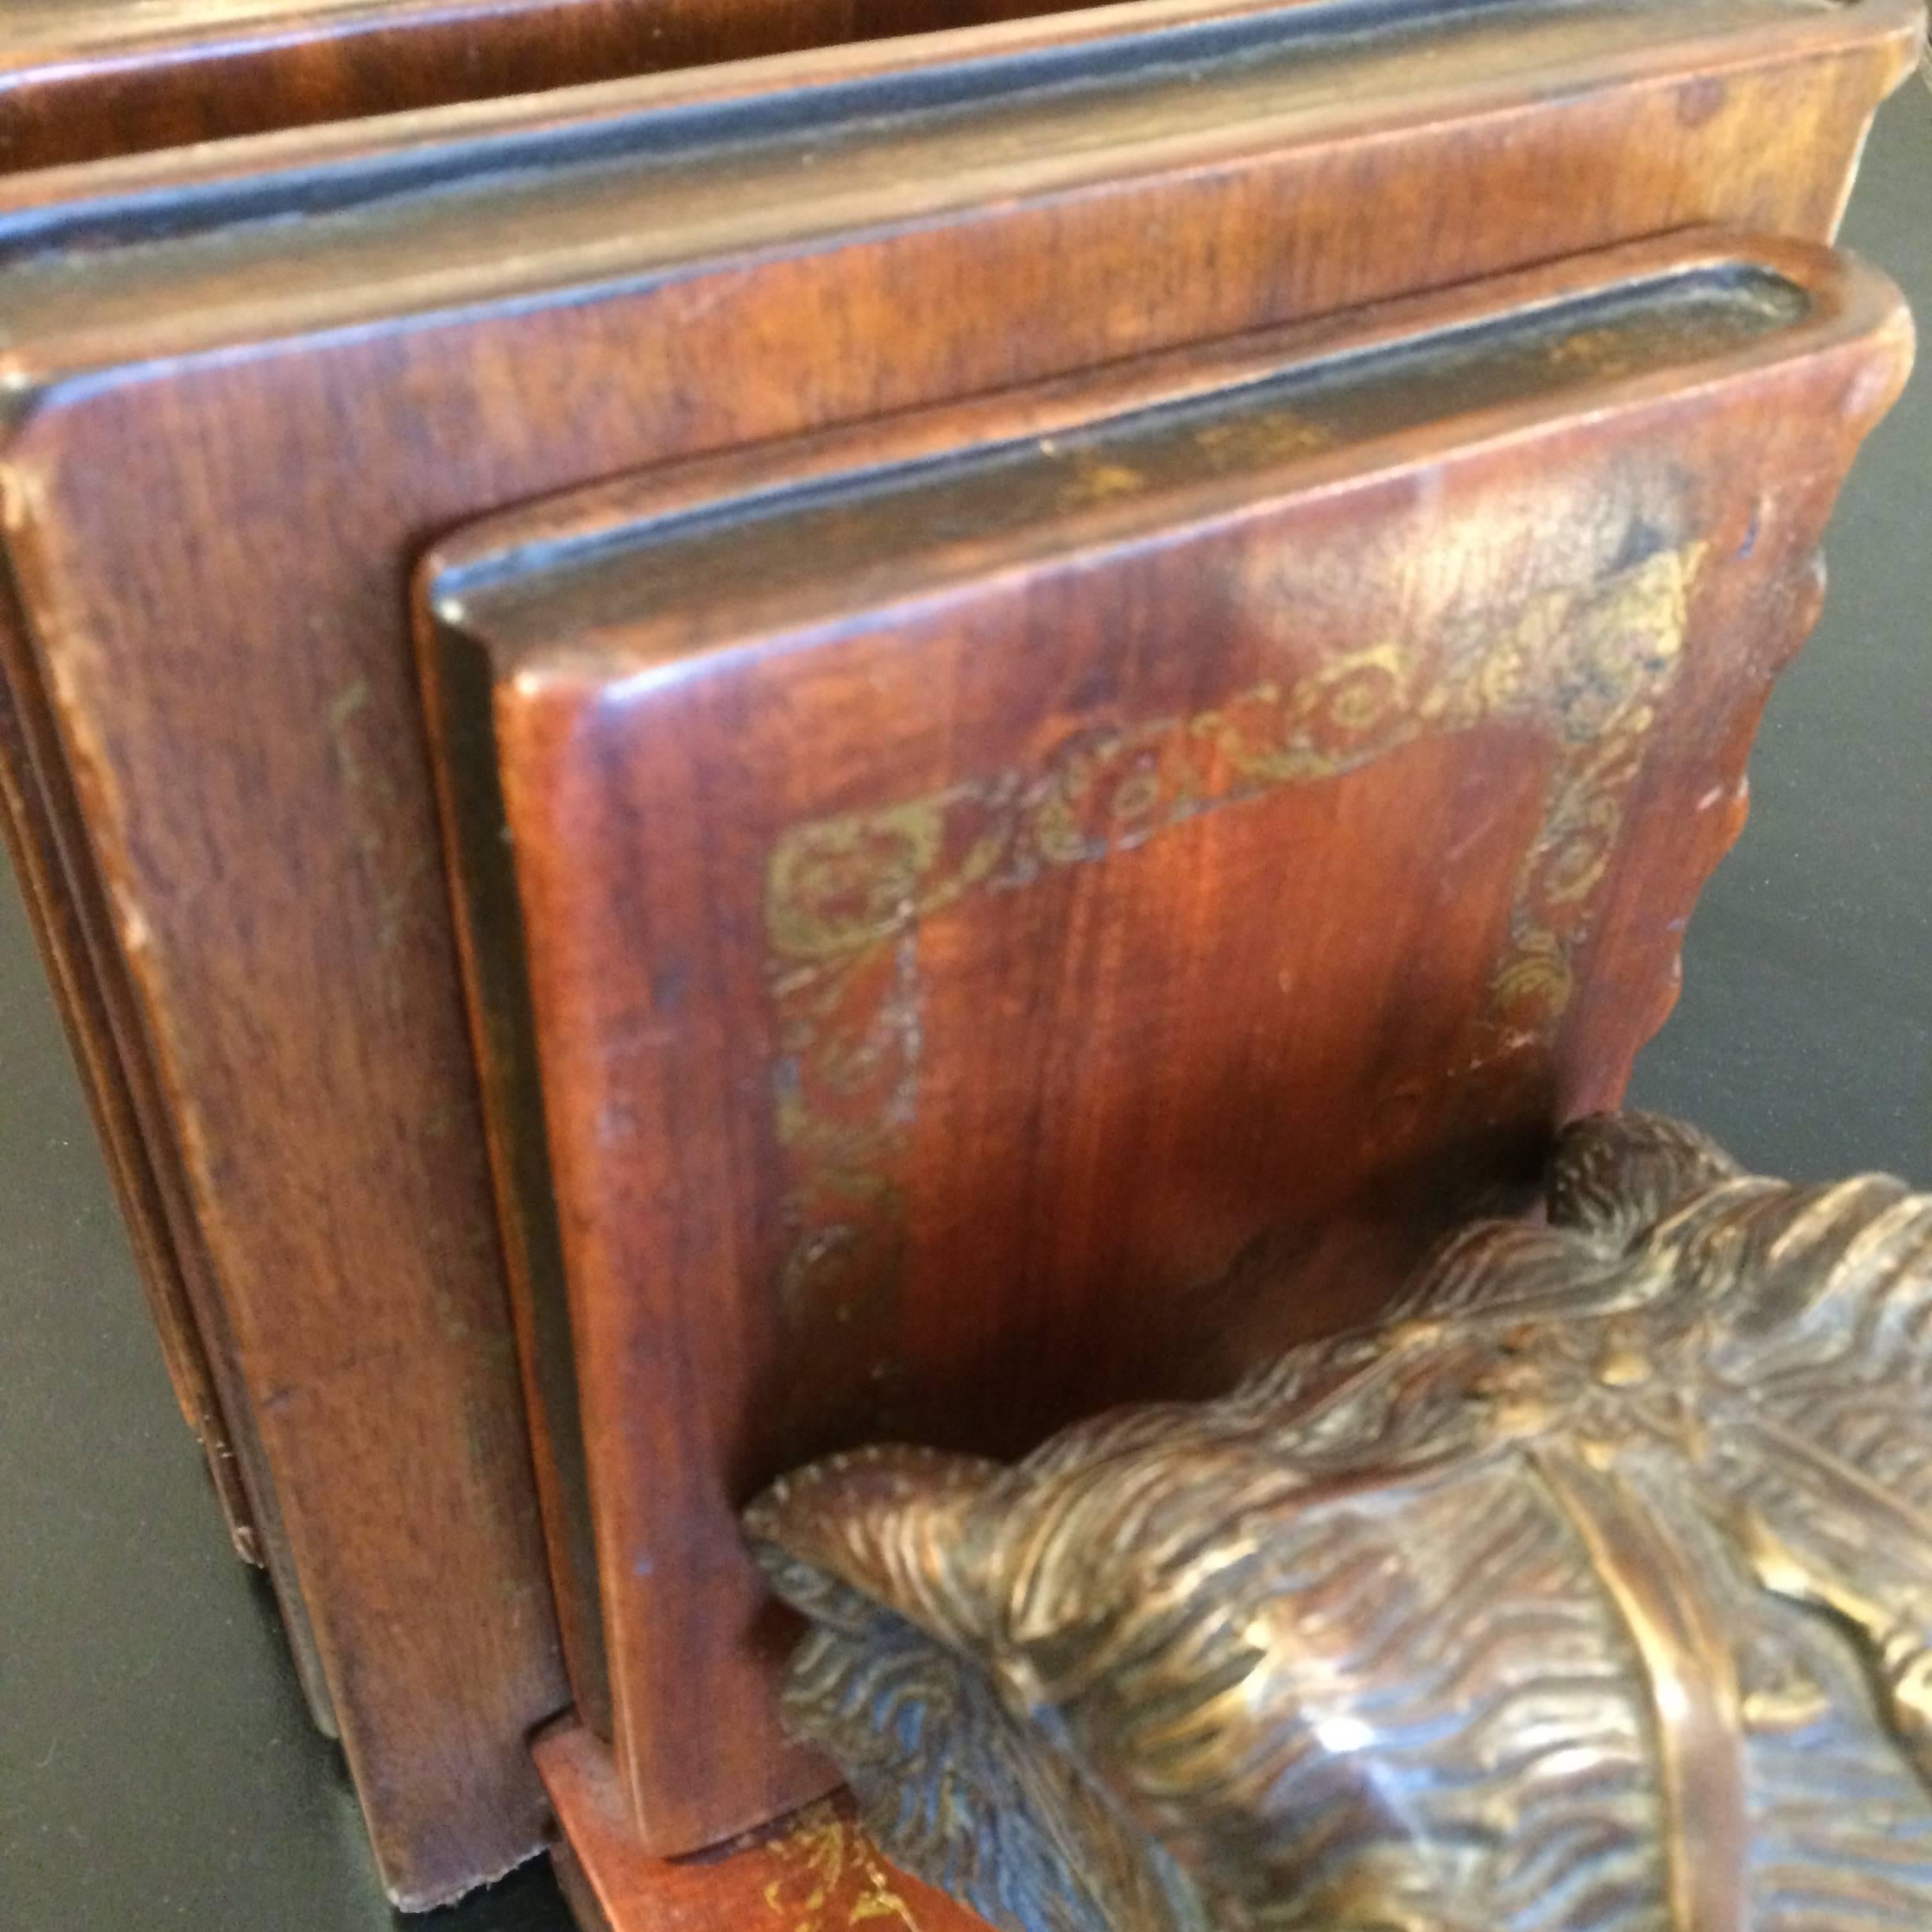 American Masculine Leather and Bronze Elephant Motiffe Bookends